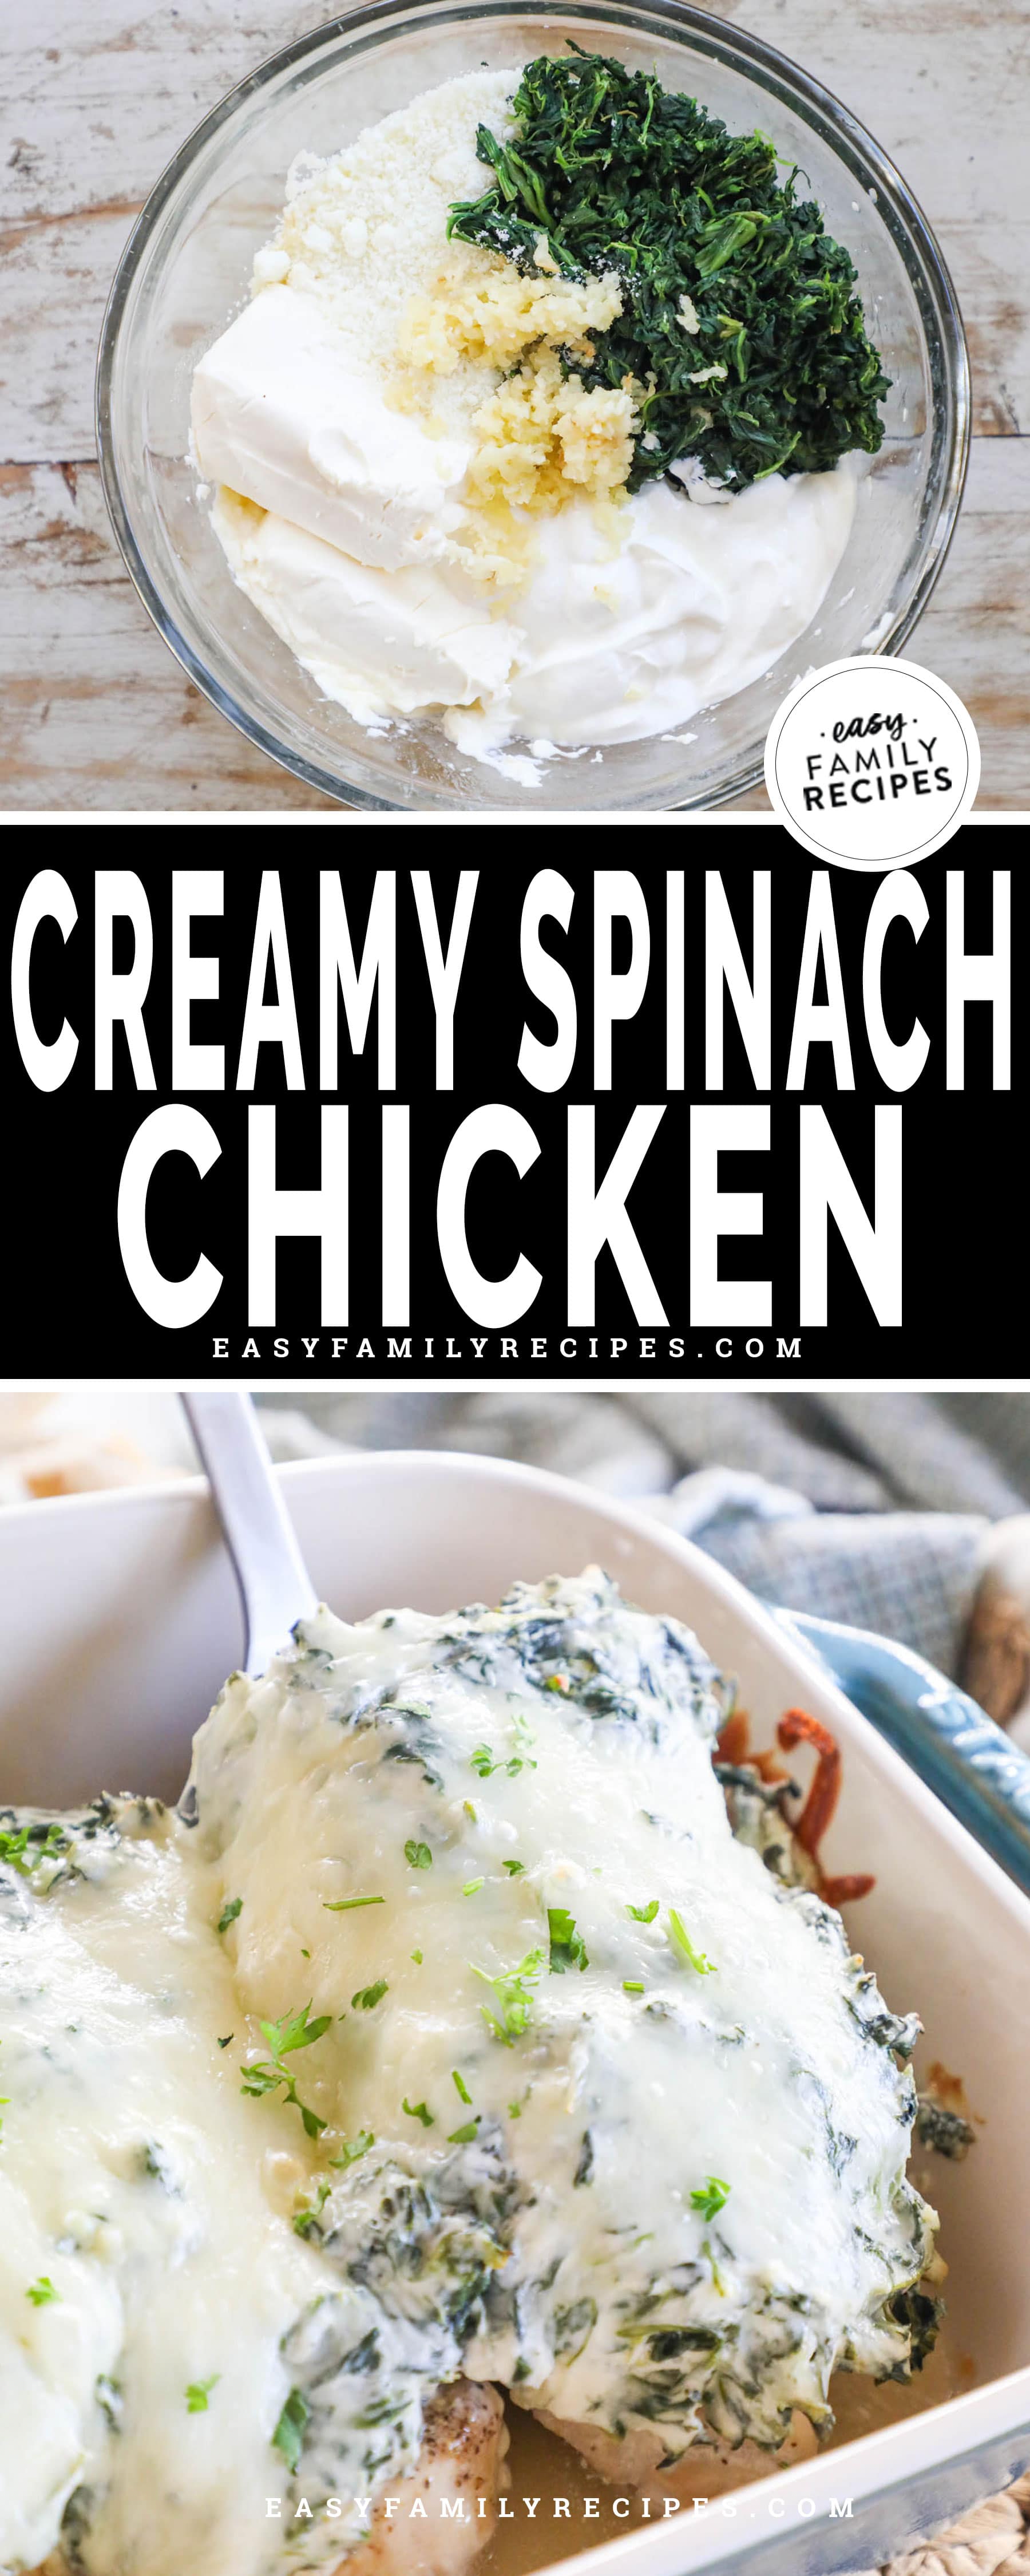 A mixture of cream cheese, sour cream, spinach, and garlic baked on top of chicken breasts